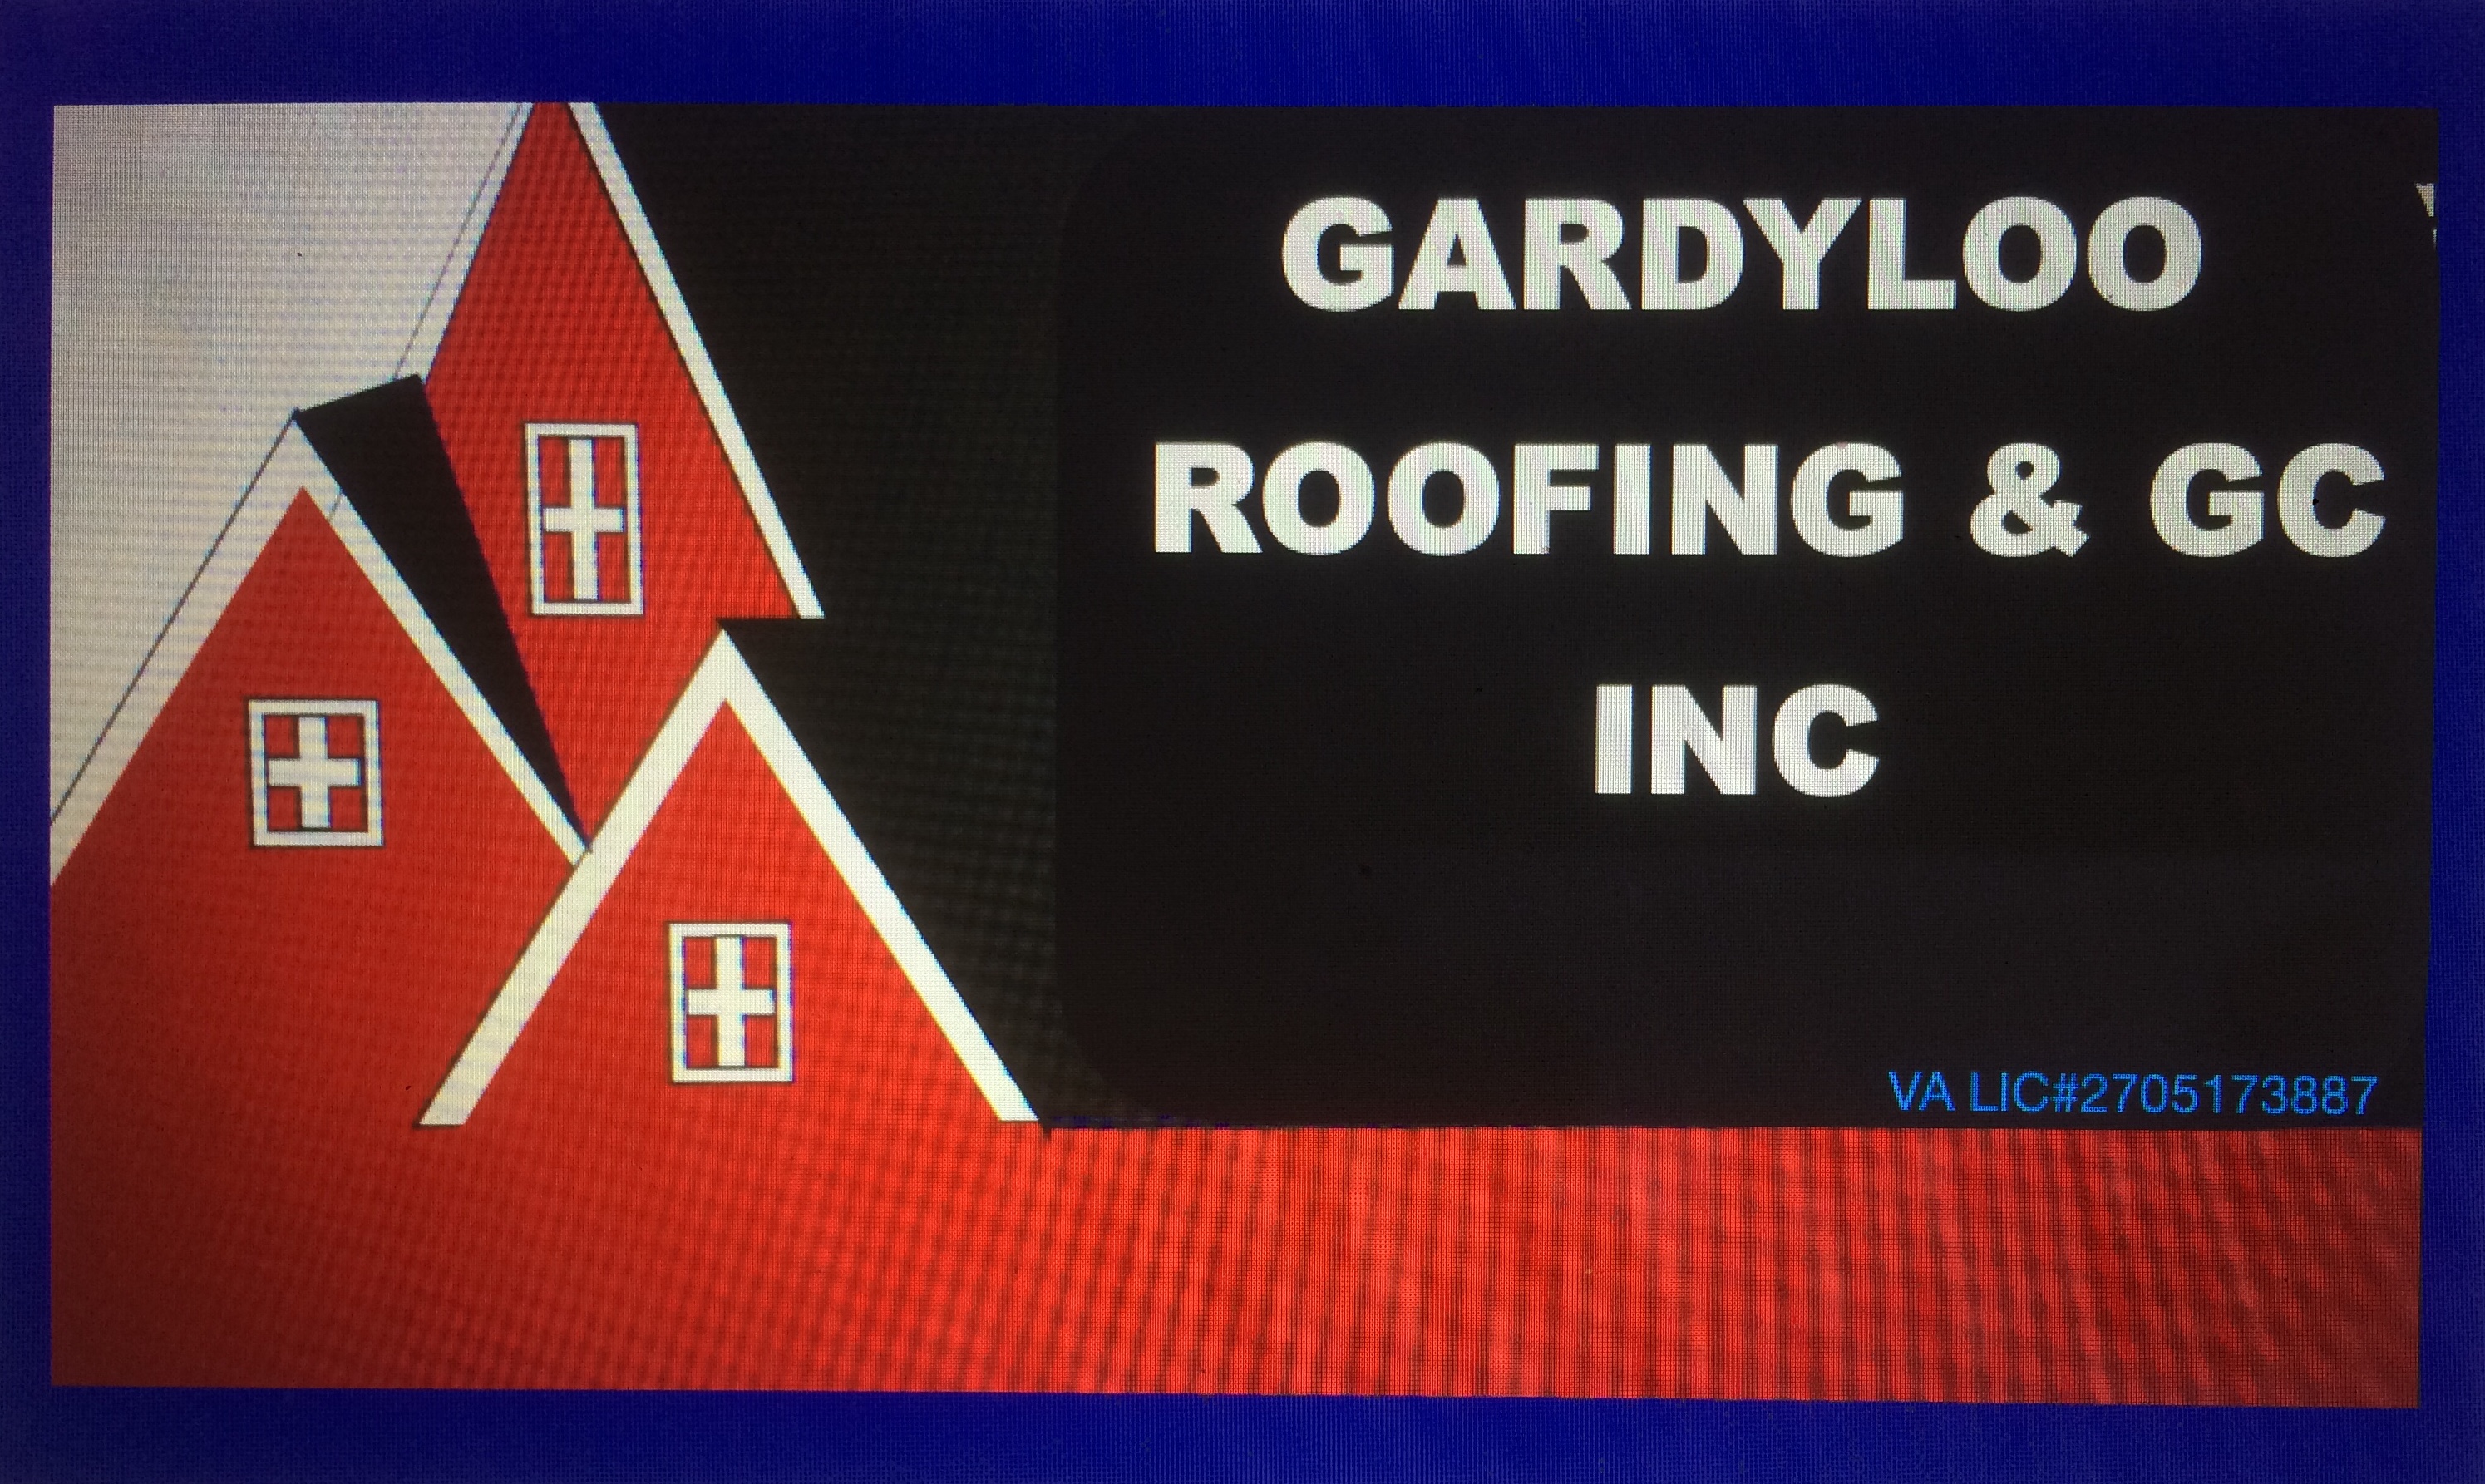 Gardyloo Roofing & Gc Inc. Highlights the Top Reasons to Hire a Professional Roofer